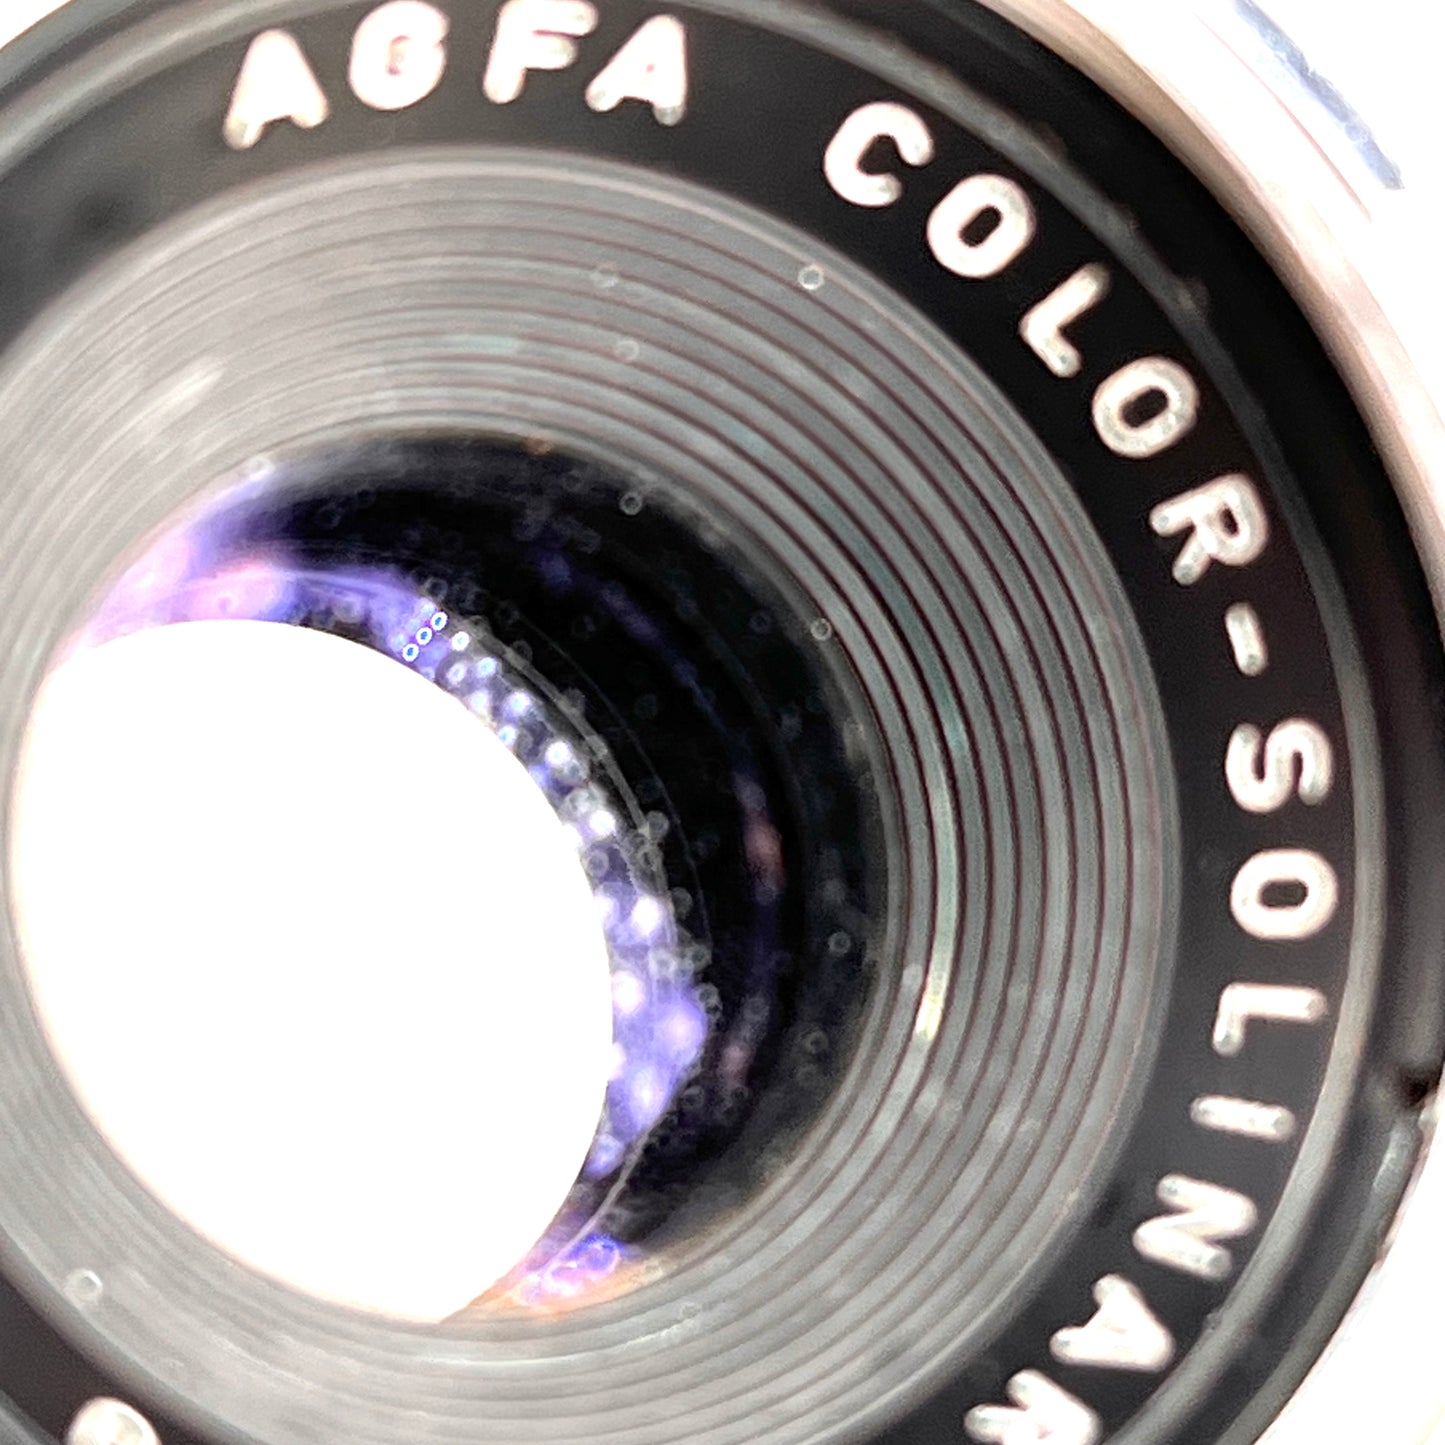 AGFA Ambi Silette color solinar 50mm f2.8